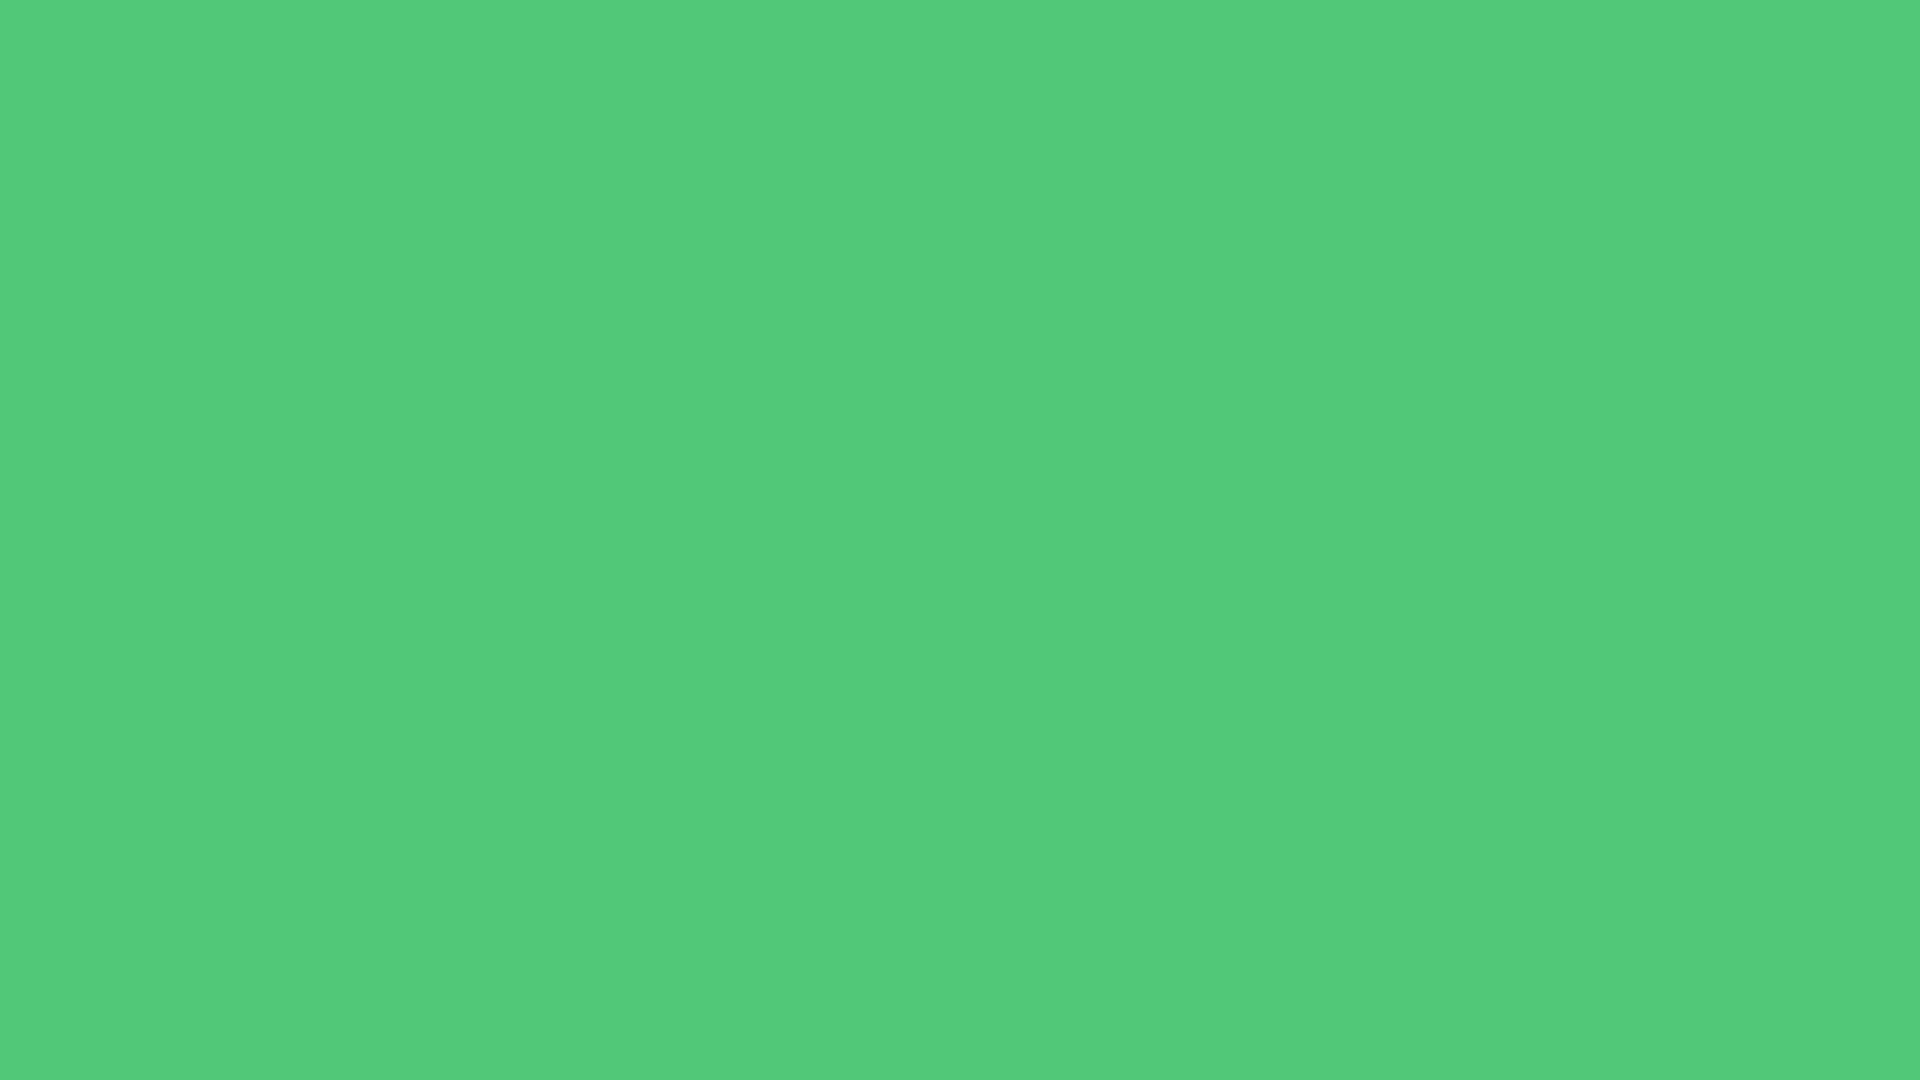 1920x1080 -paris-green-solid-color-background.jpg